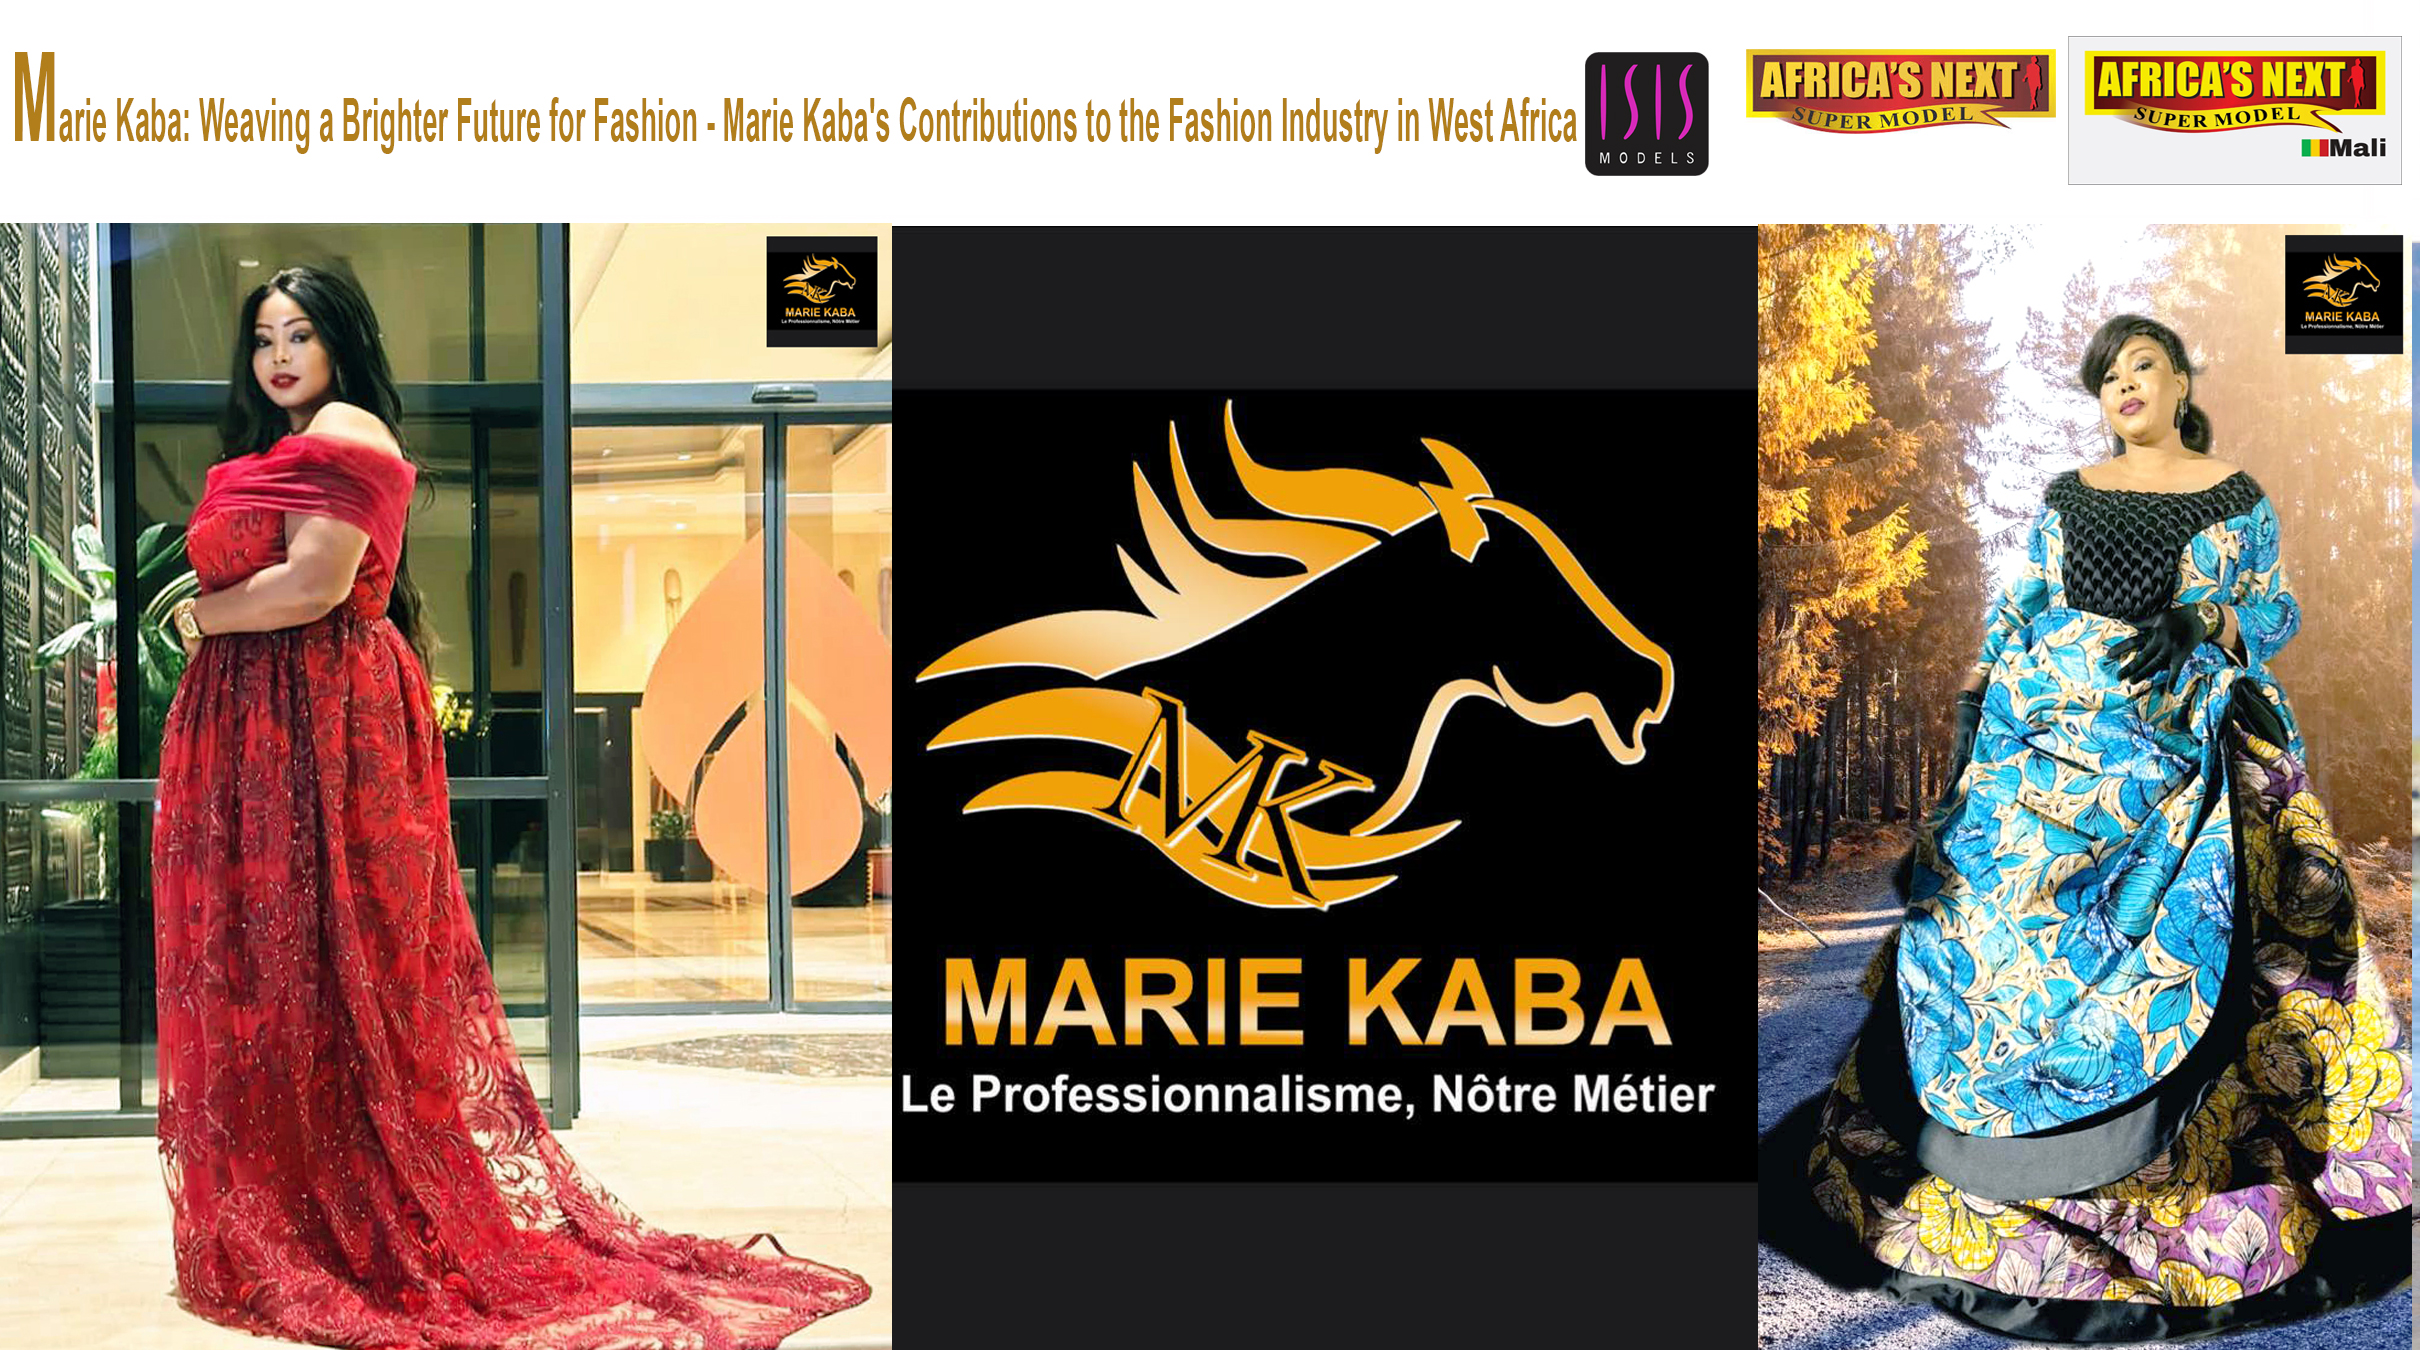 AFRICA-VOGUE-COVER-Marie-Kaba-Weaving-a-Brighter-Future-for-Fashion-Marie-Kaba's-Contributions-to-the-Fashion-Industry-in-West-Africa-DN-AFRICA-Media-Partner